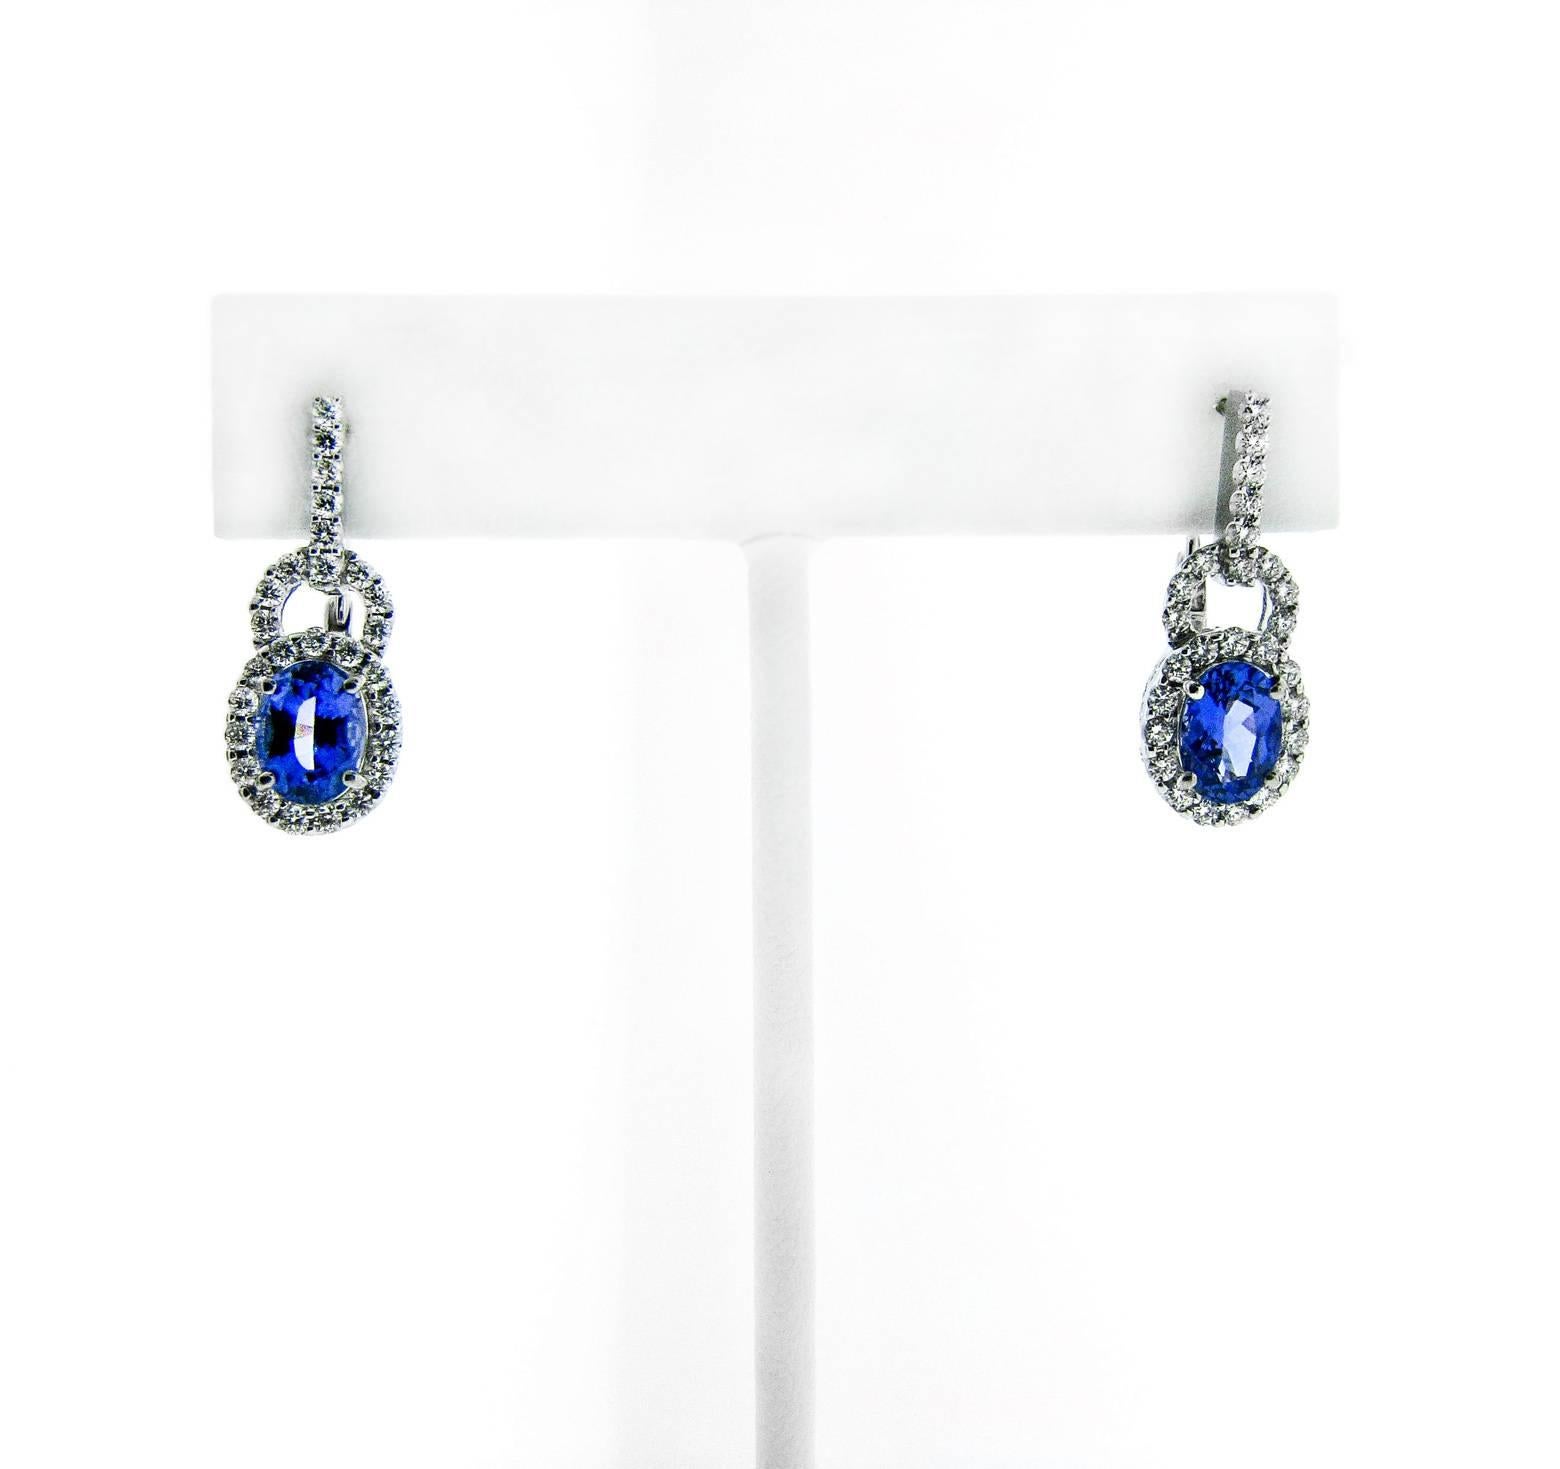 These elegant 18 karat white gold earrings feature shimmering oval faceted blue Tanzanite gemstones (2.86 carats). Luminous white diamonds surround the center stone, create a beautiful arc above it, and travel up the length of the earrings. These